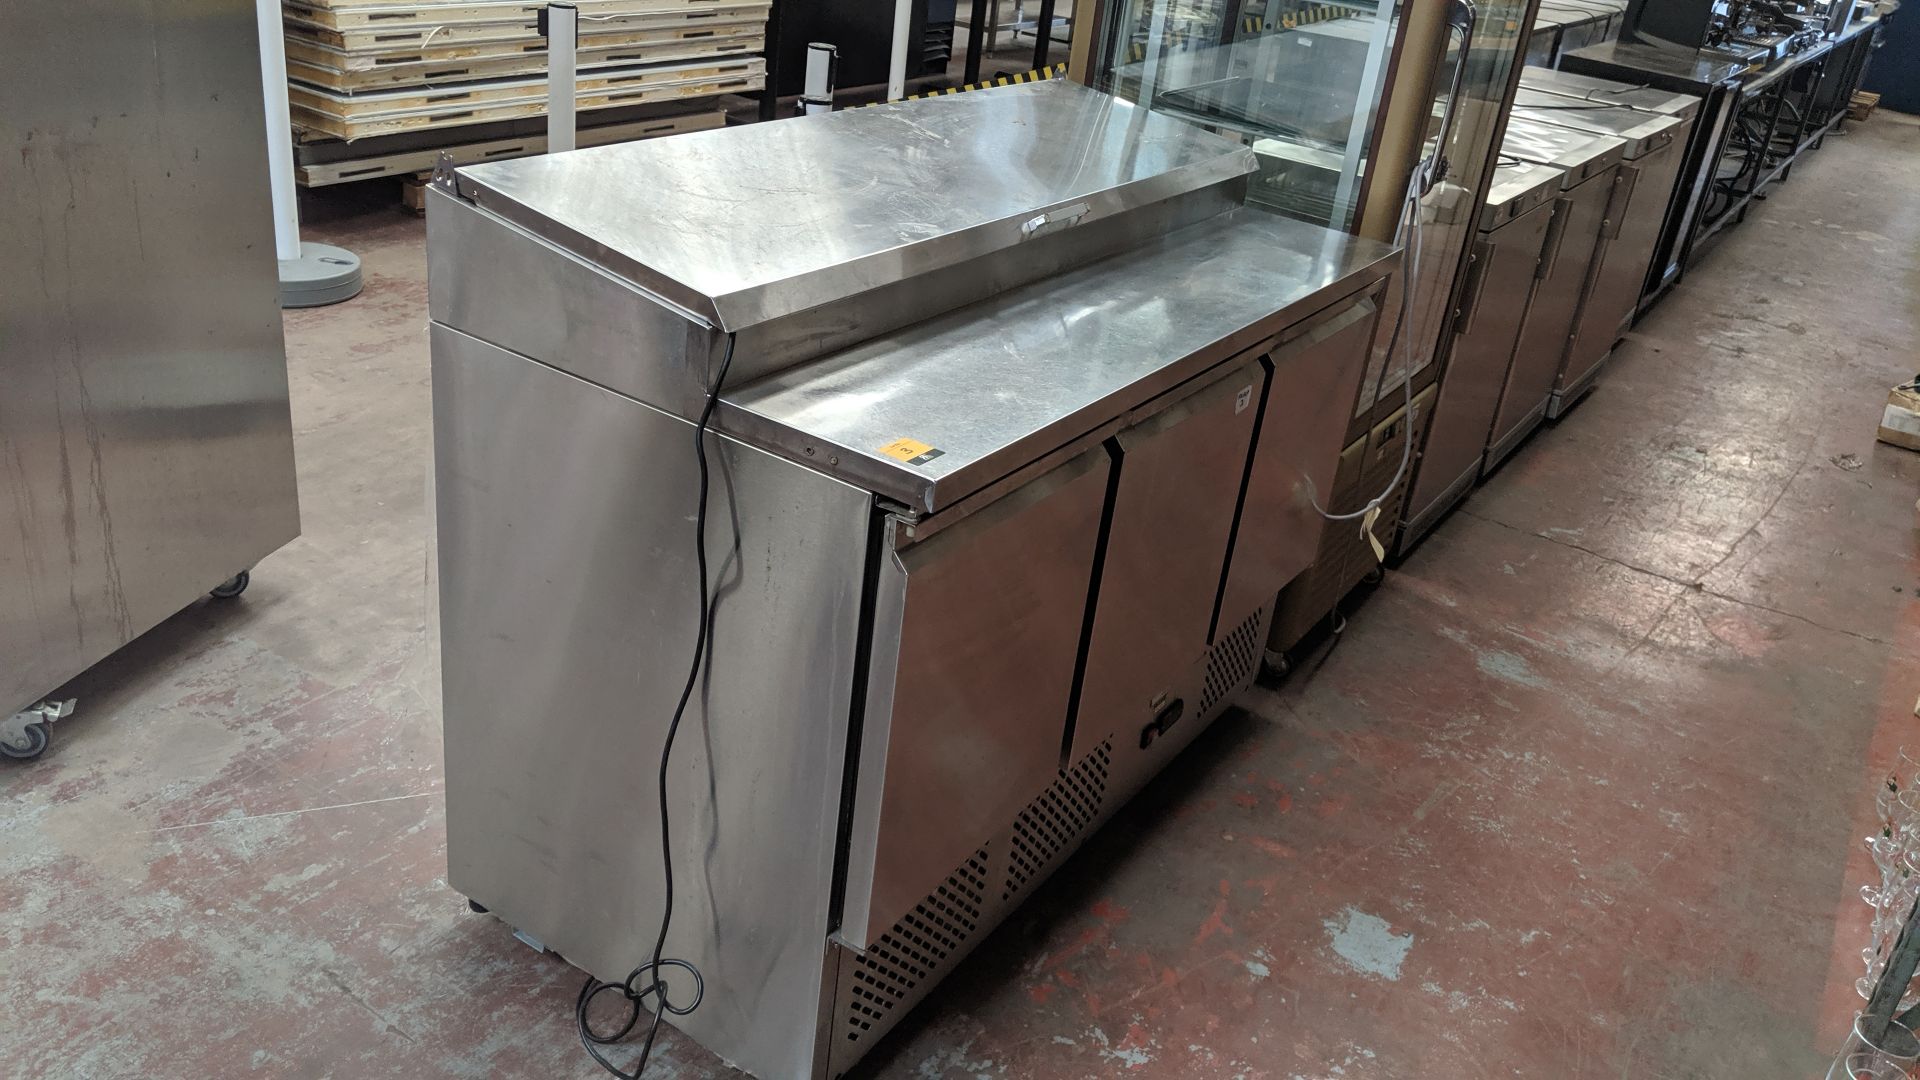 Interlevin stainless steel refrigerated triple door prep counter with hinged lid access salad - Image 6 of 7